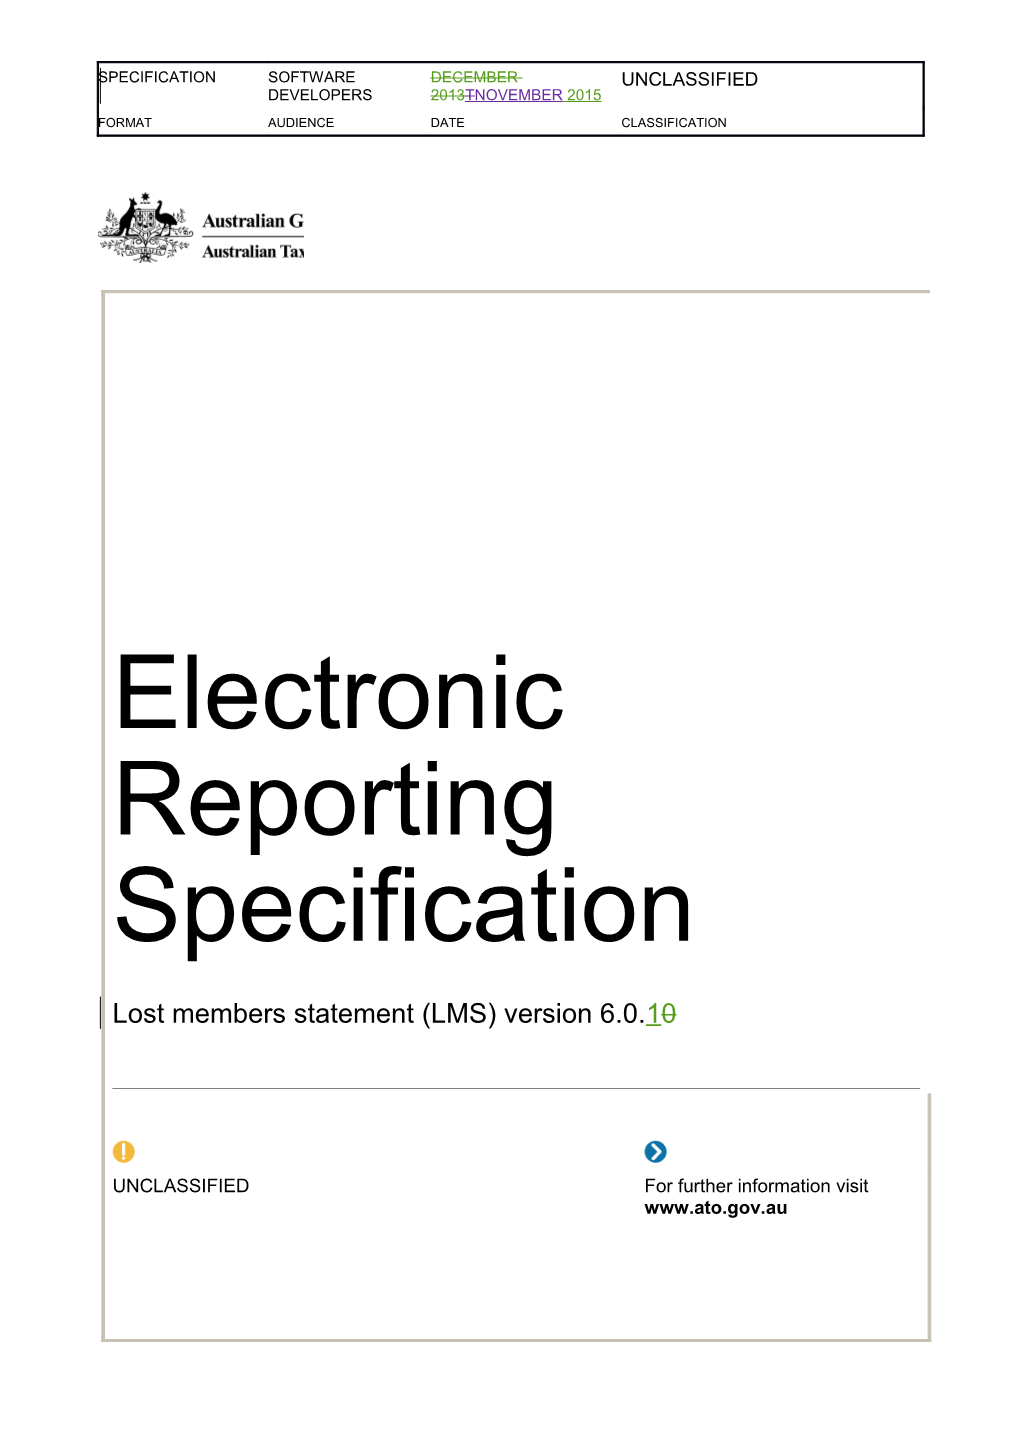 Electronic Reporting Specification Lost Member Statement